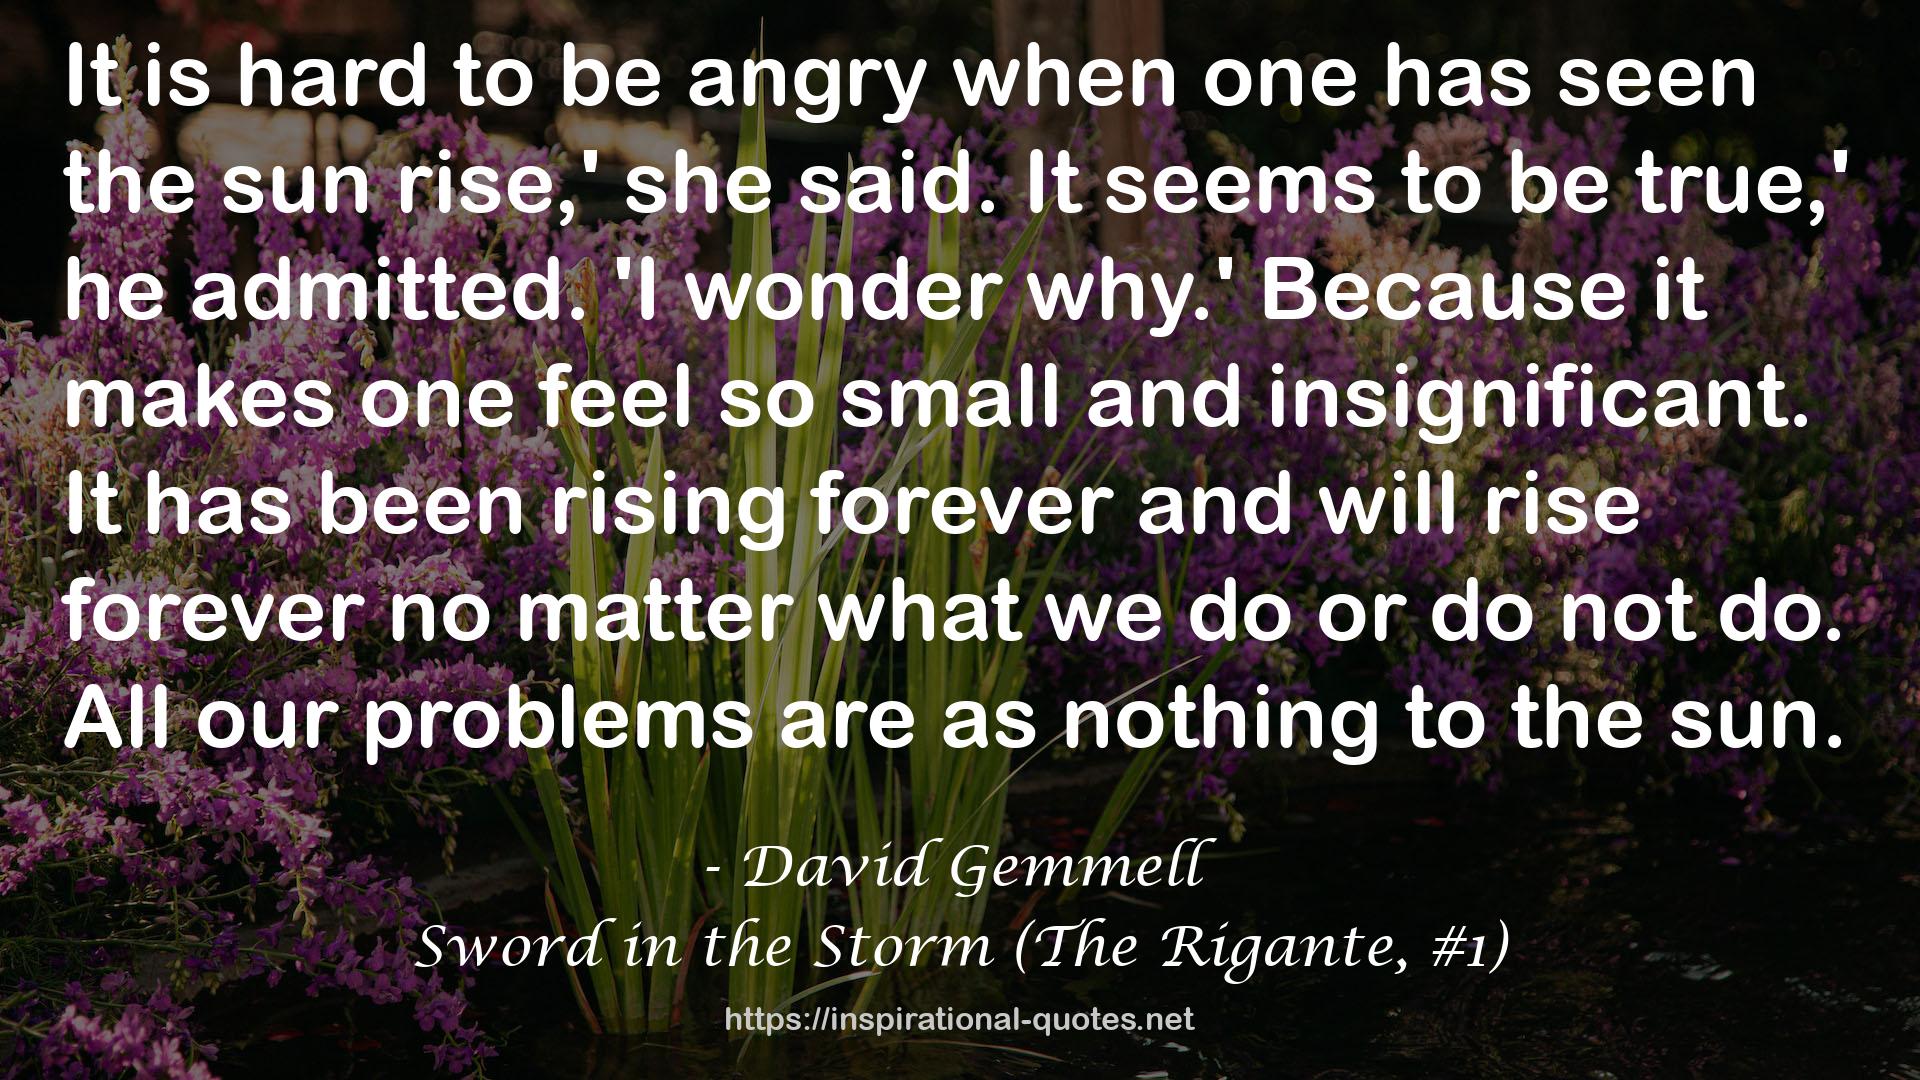 Sword in the Storm (The Rigante, #1) QUOTES